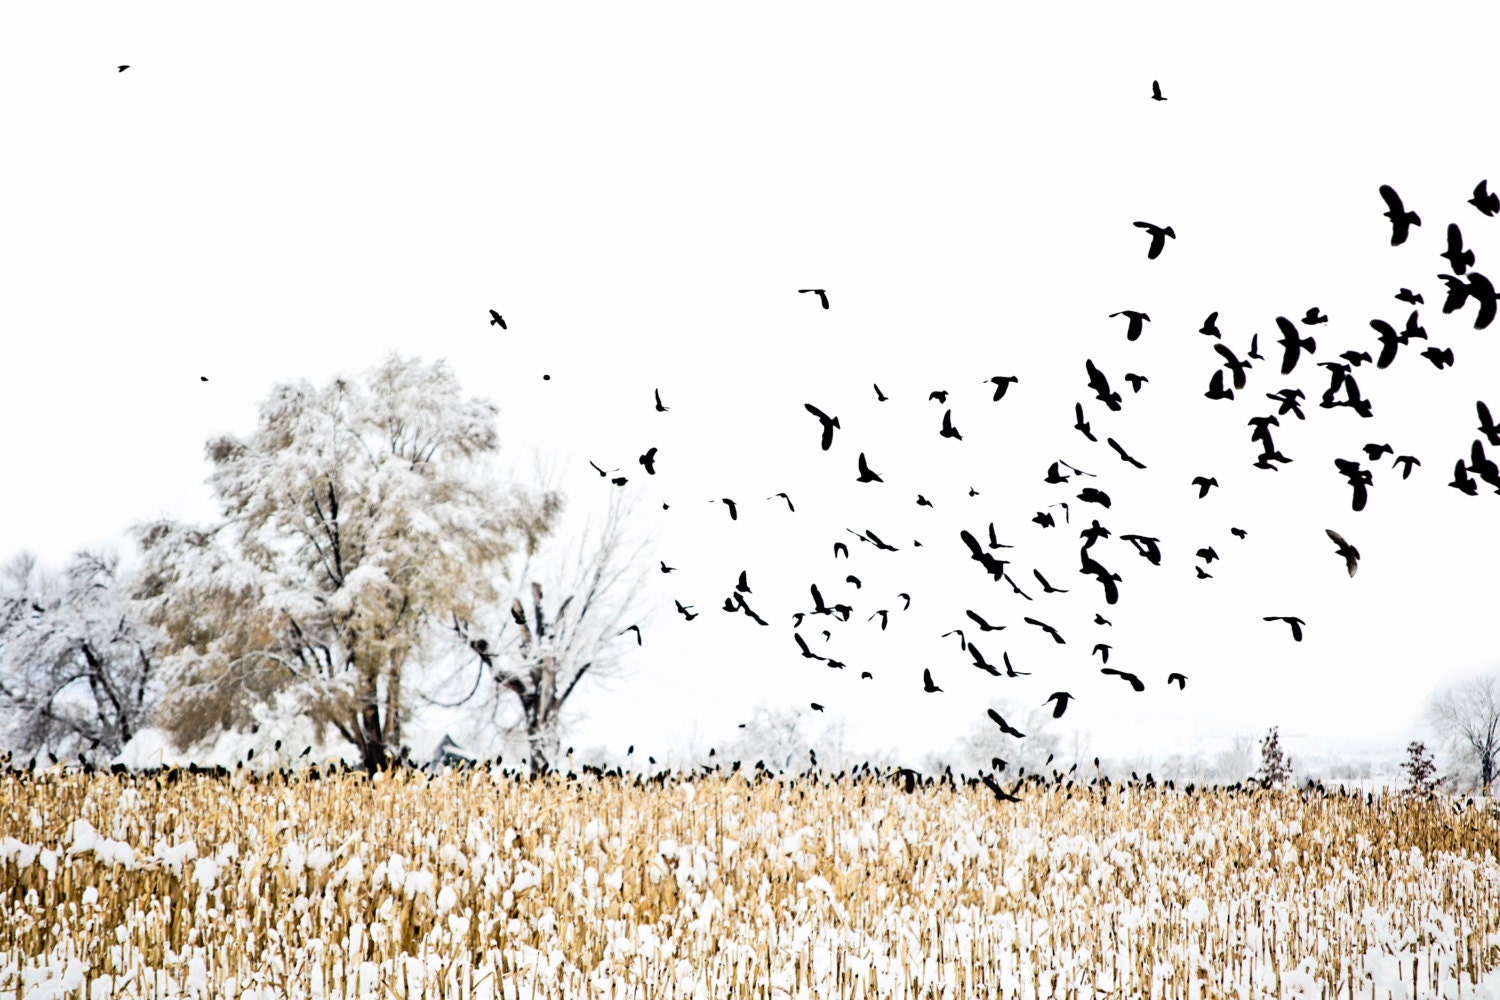 Winter black birds photo - 24 by 16 inch canvas - PushpinPictures